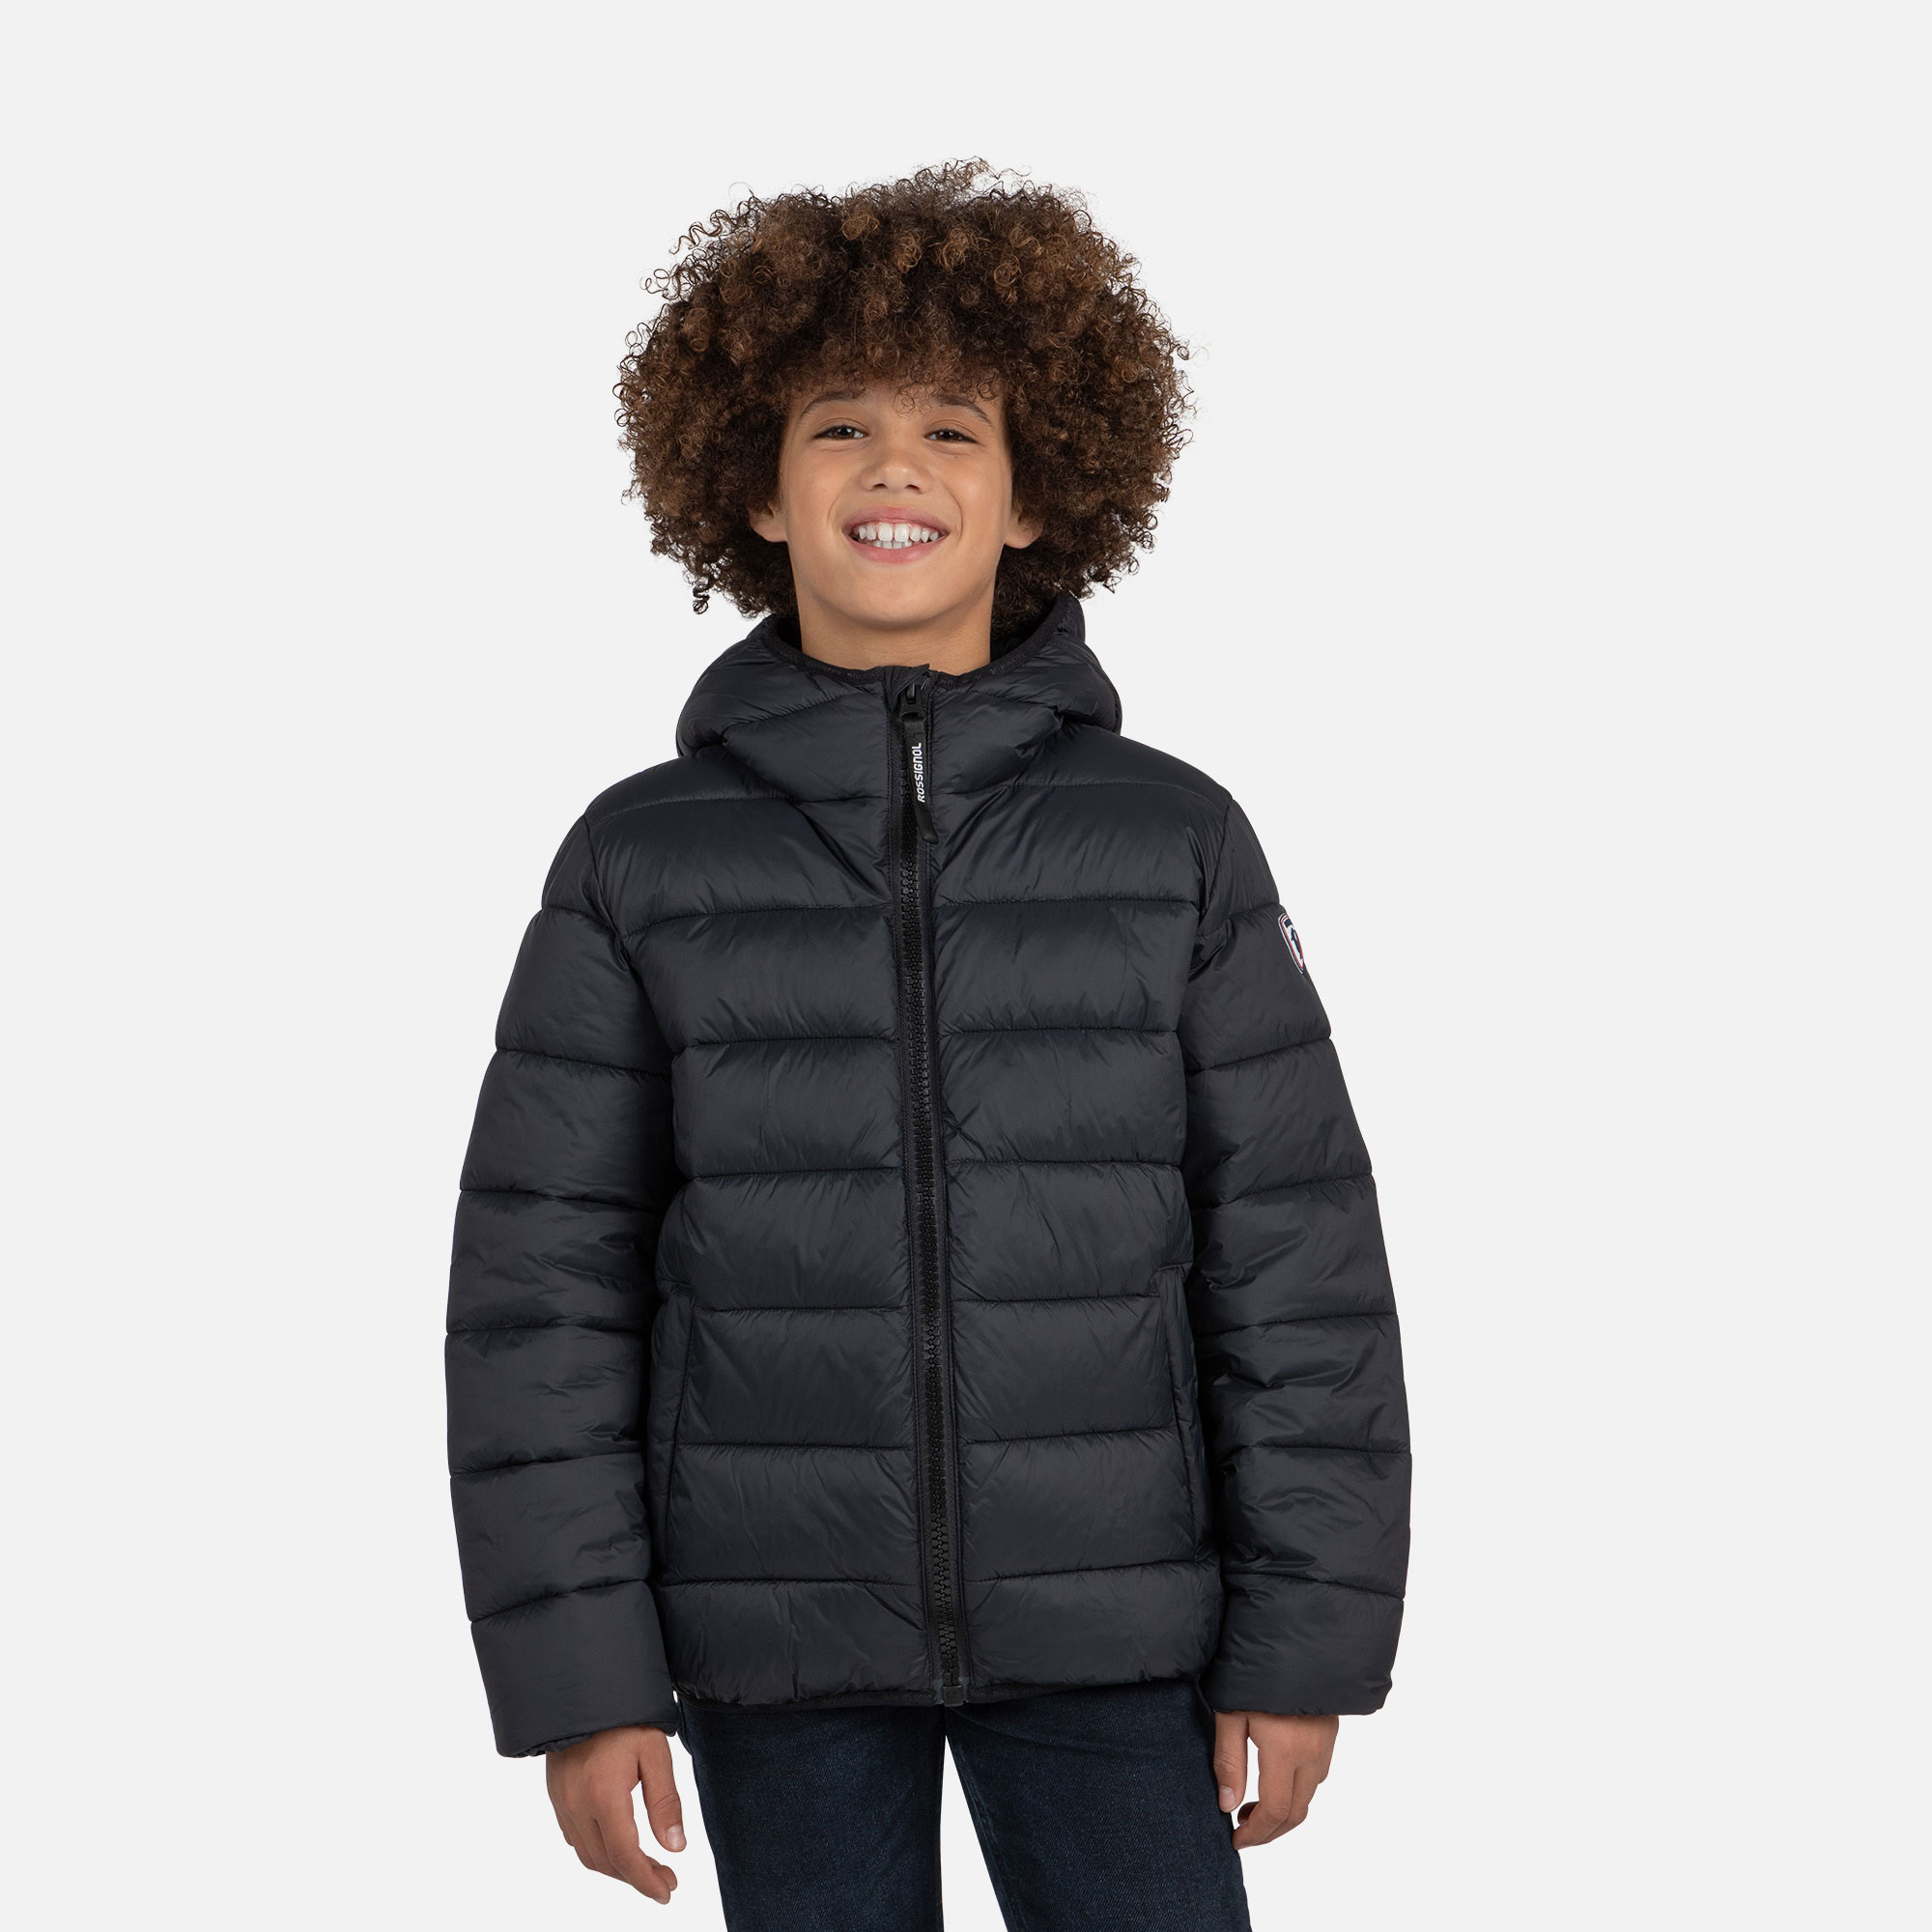 Boys' Lightweight Quilted Jacket